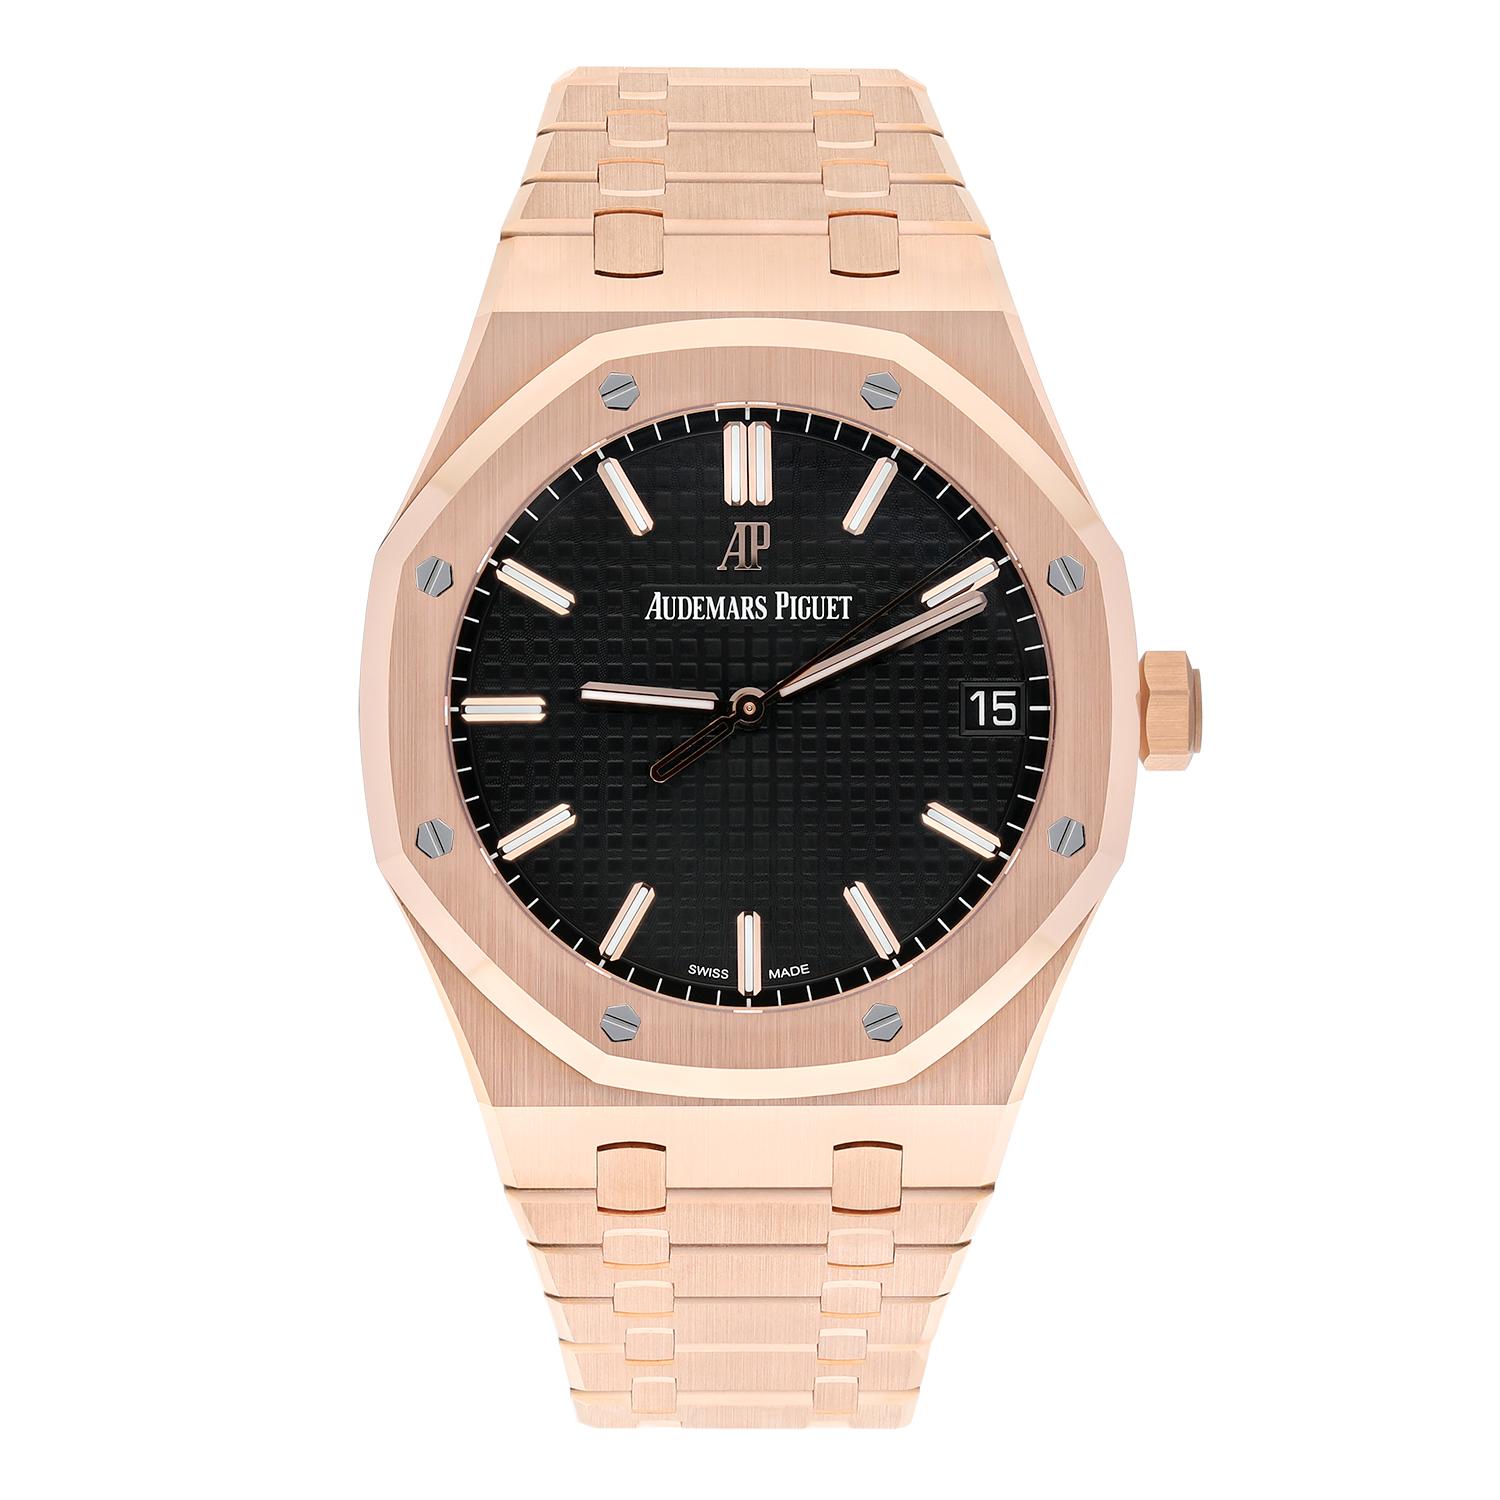 Introducing the Audemars Piguet Royal Oak Watch (Model: 15500OR.OO.1220OR.01) – a luxurious and new timepiece that exudes sophistication. Adorned with a rose gold case, the watch features a striking black dial embellished with rose gold indexes,